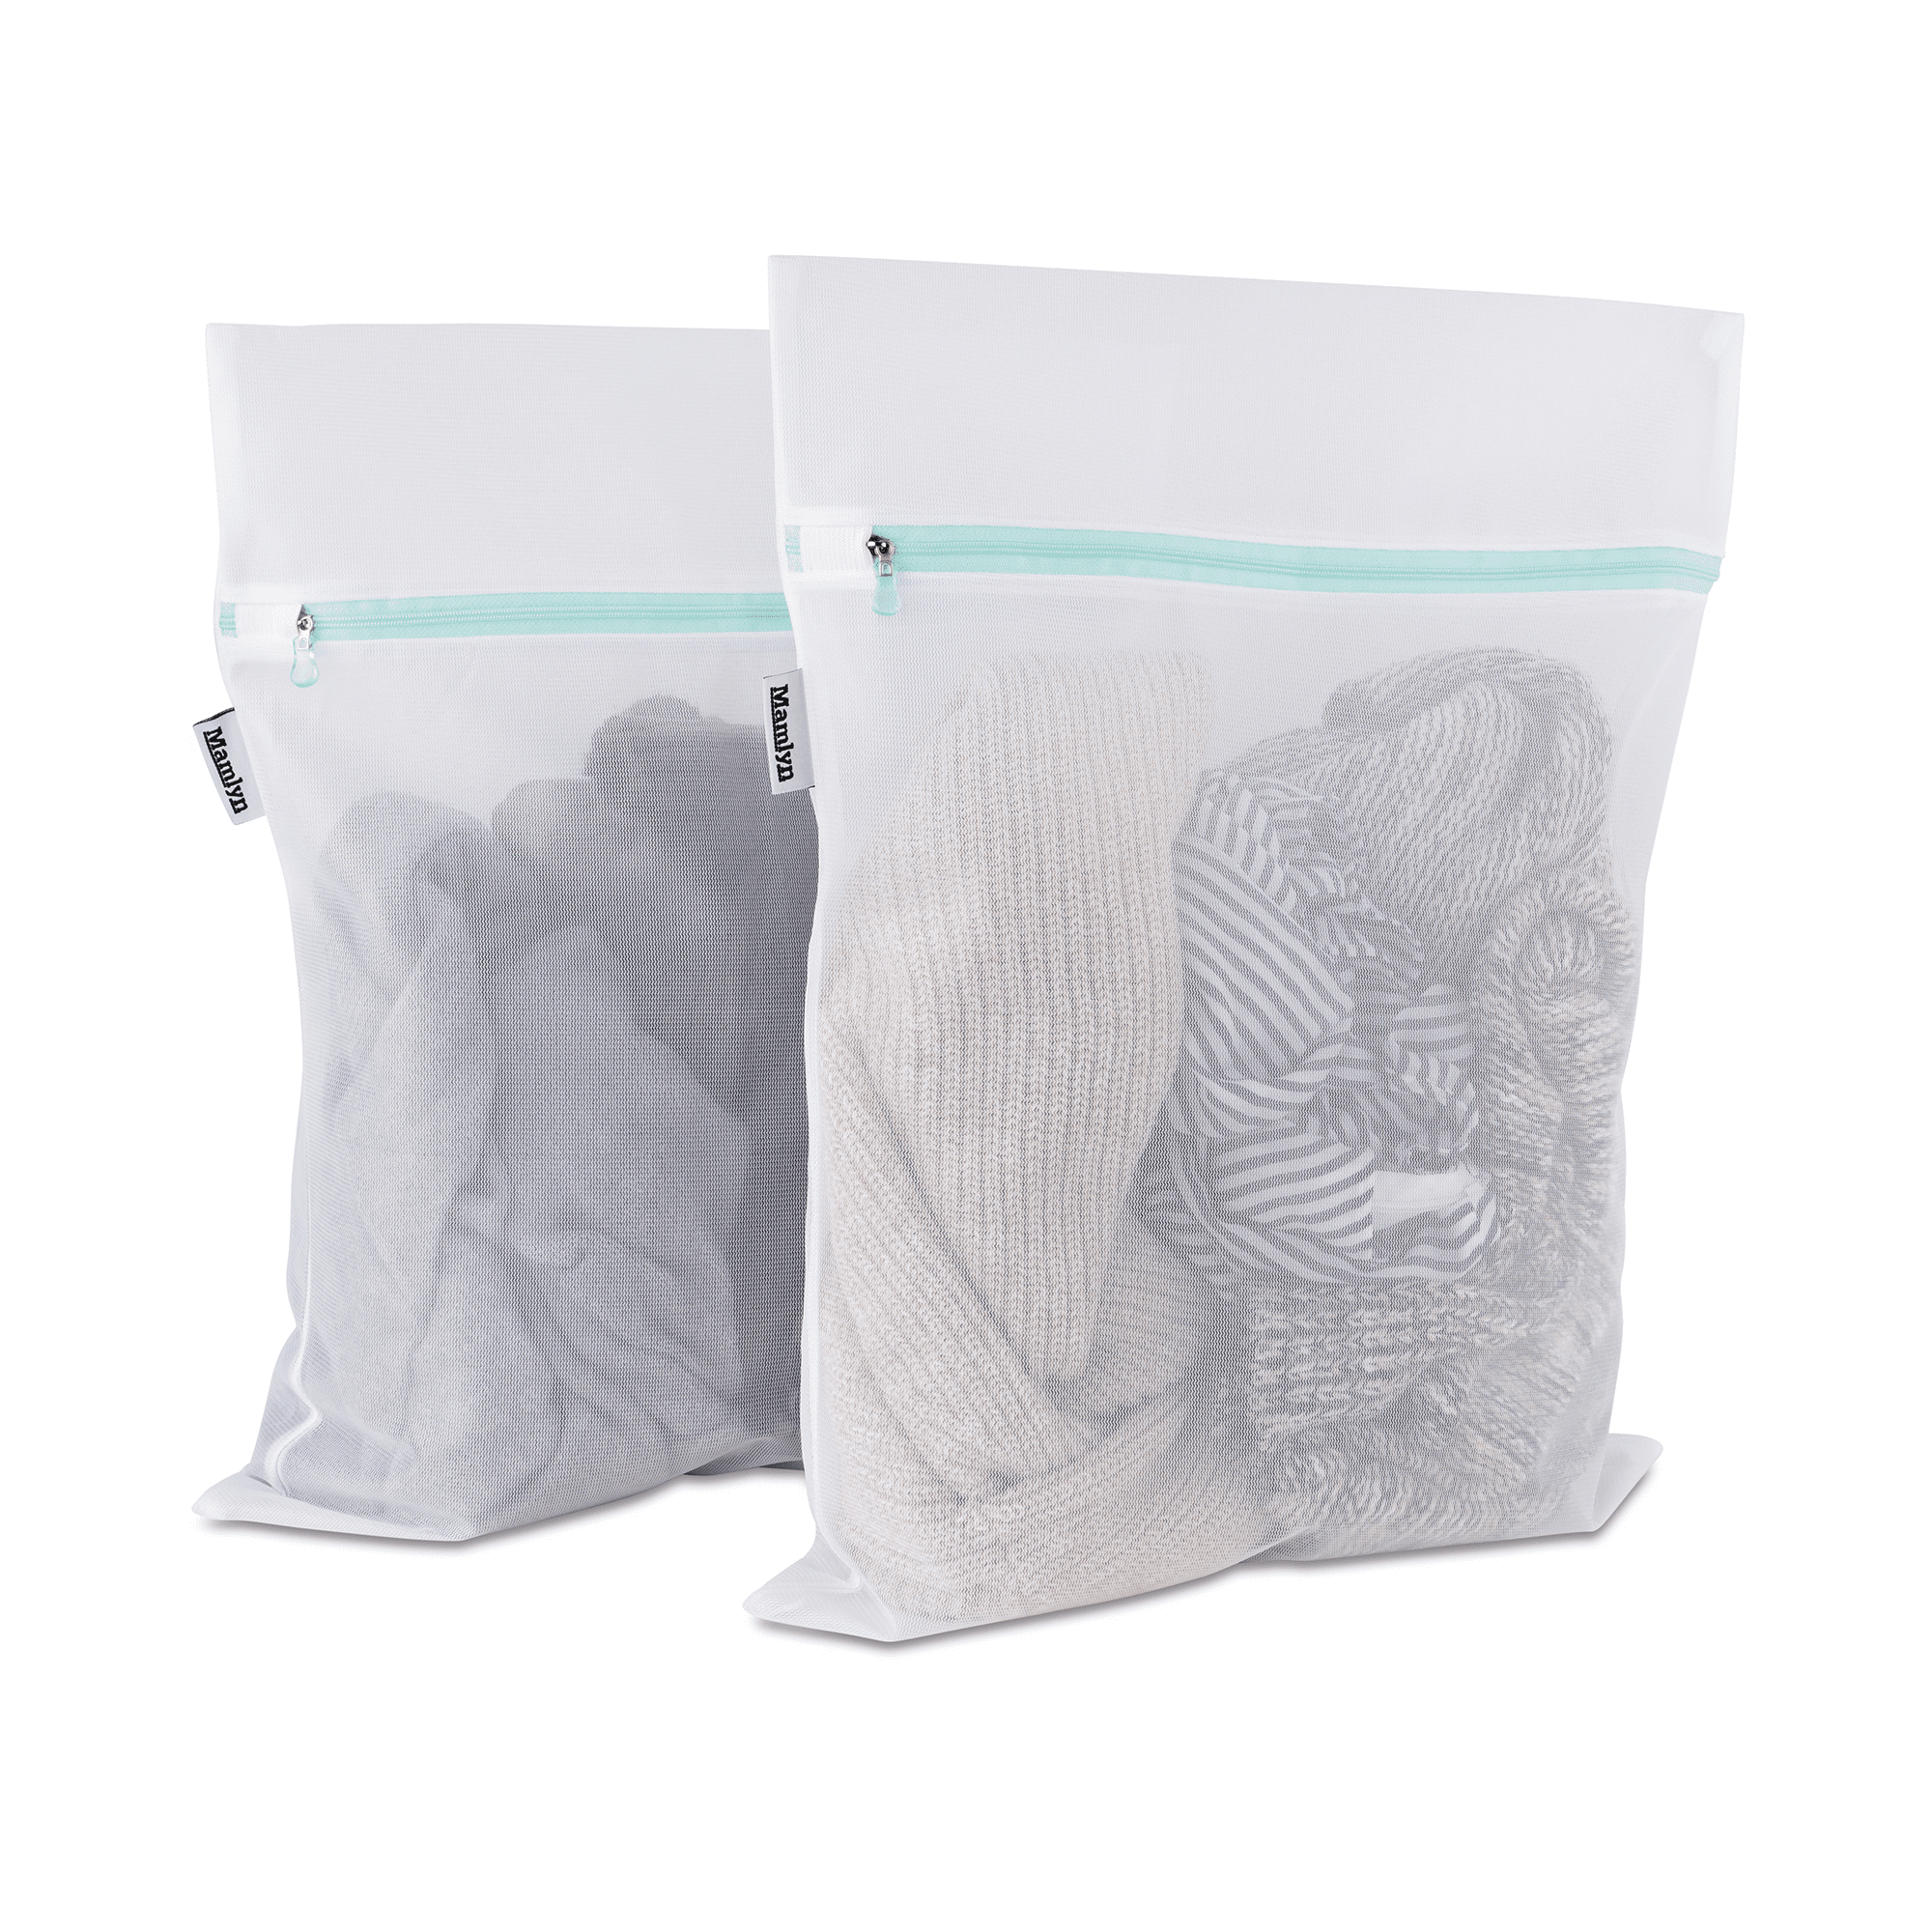 3 Piece Set Details about   3 Sizes Color Coded Zippered Mesh Wash Bags 